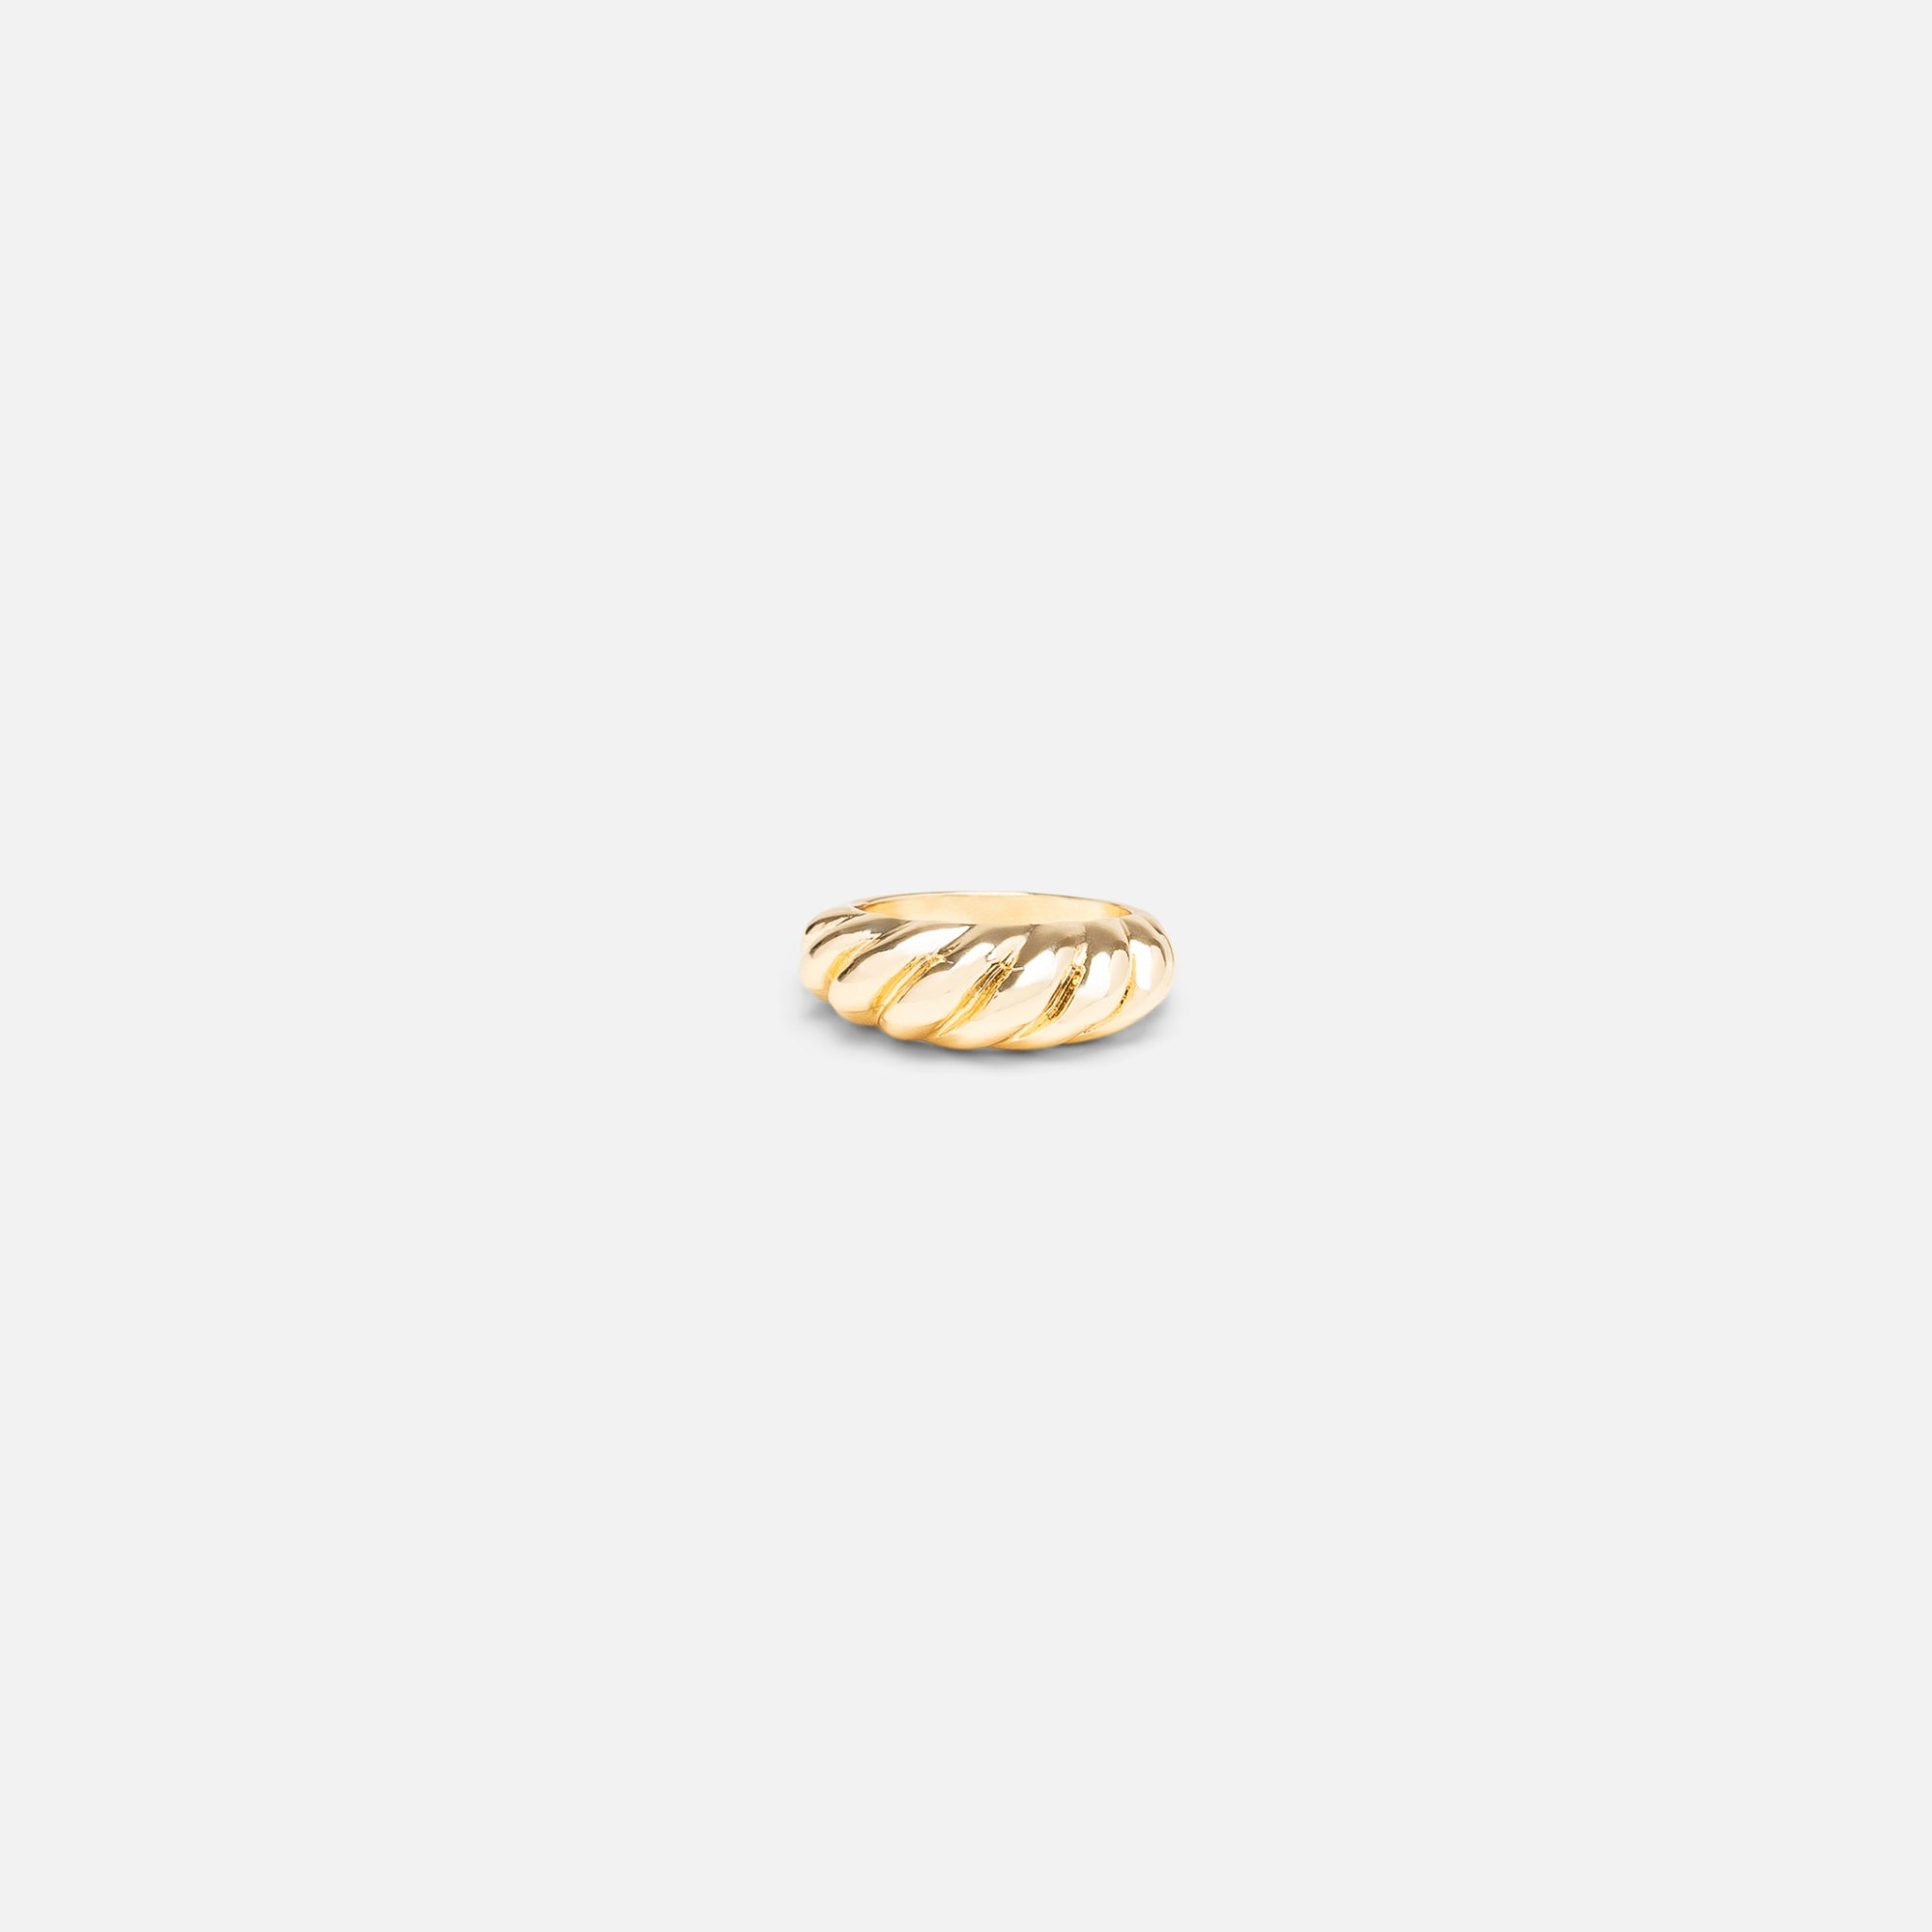 Stainless steel golden ring with twists